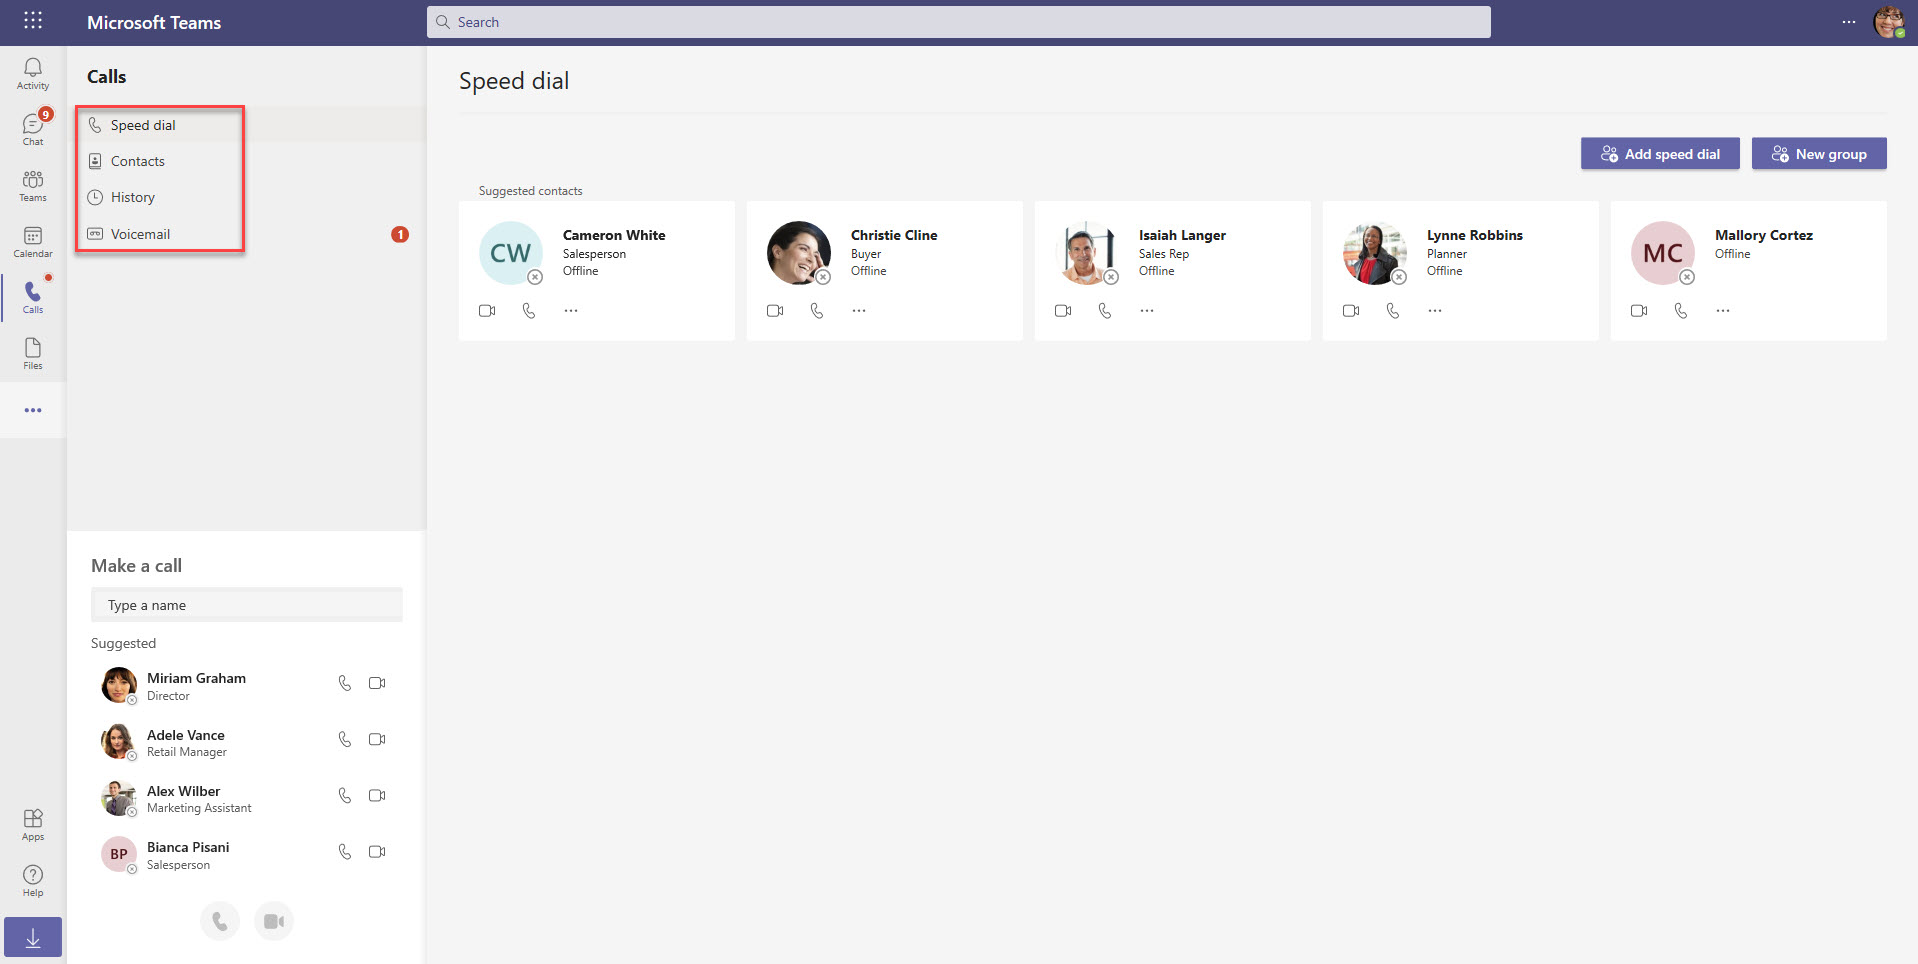 How to use calls in Microsoft Teams